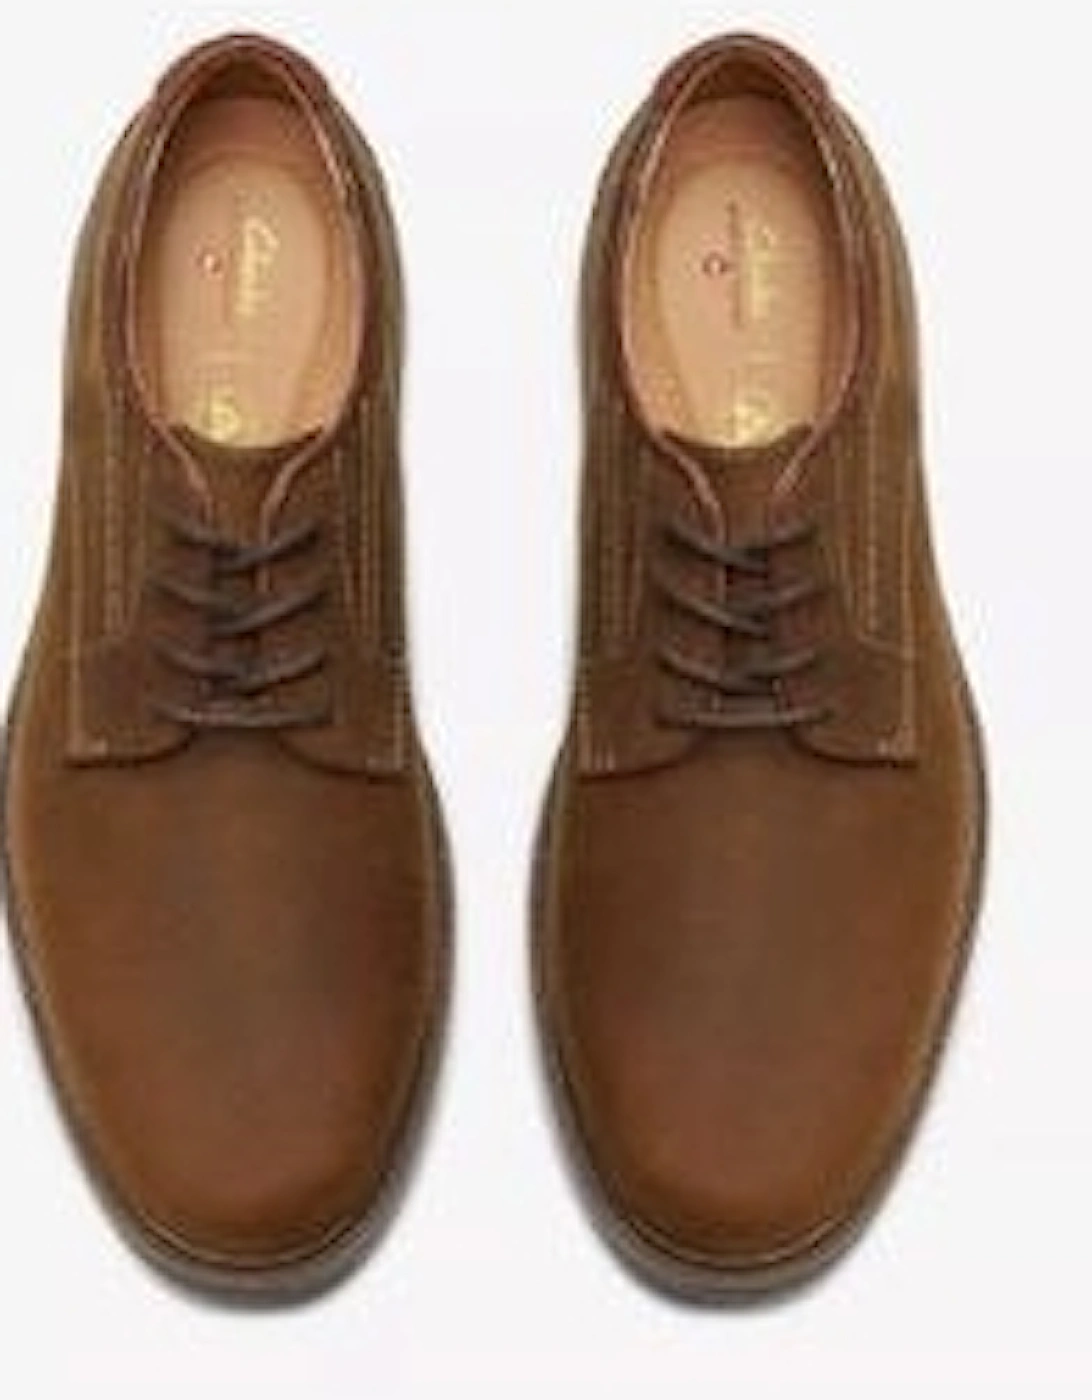 Un Shire Low in Beeswax Leather Extra Wide